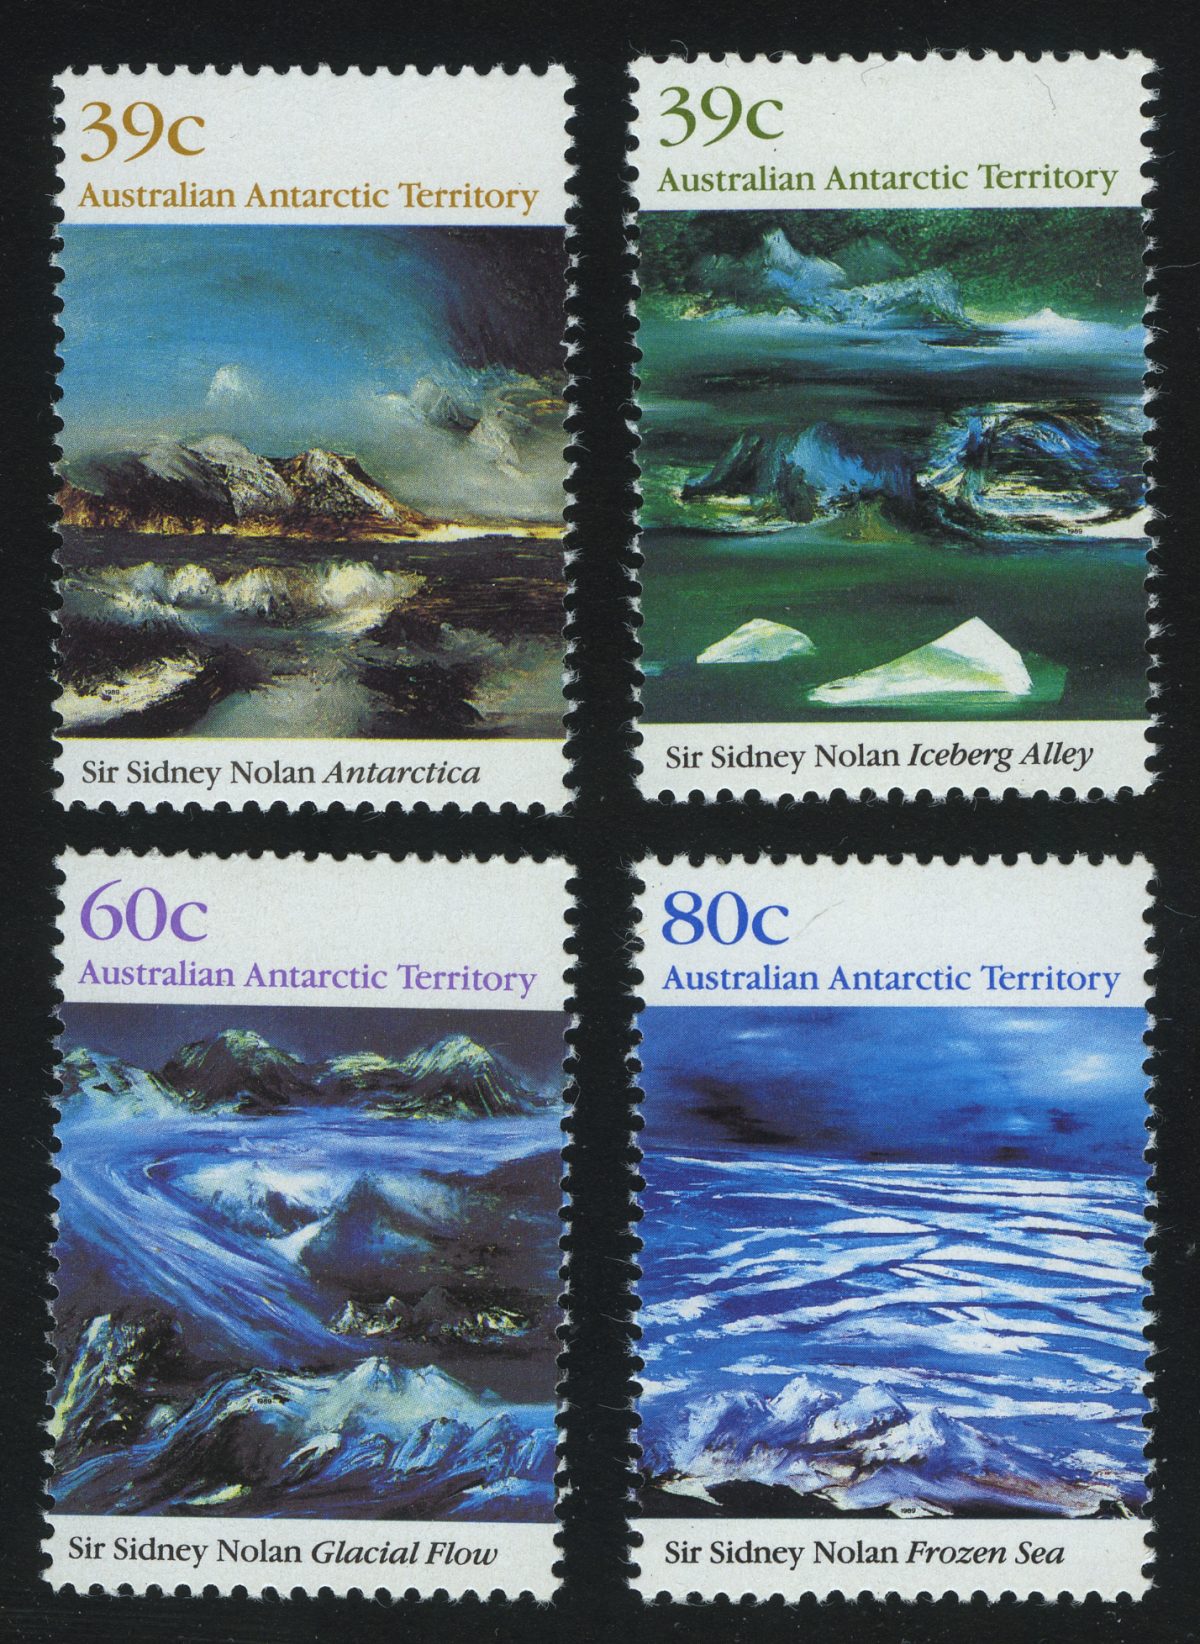 1989 Antarctic Landscape Paintings by Sir Sidney Nolan